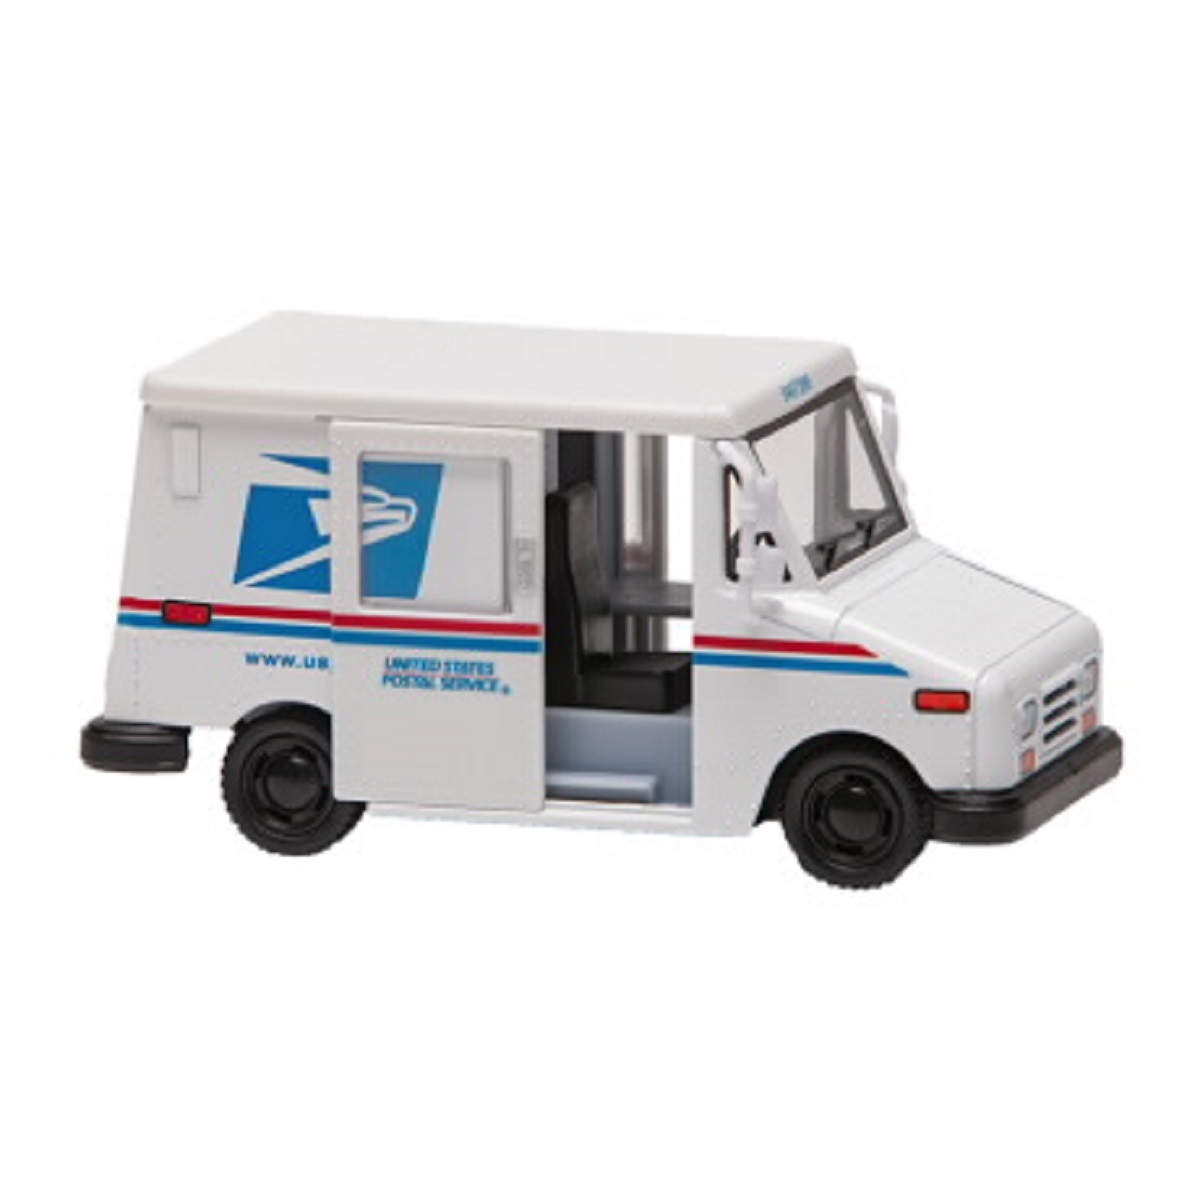 A replica of a USPS postal truck. EVs cost less to maintain than gas powered vehicles.